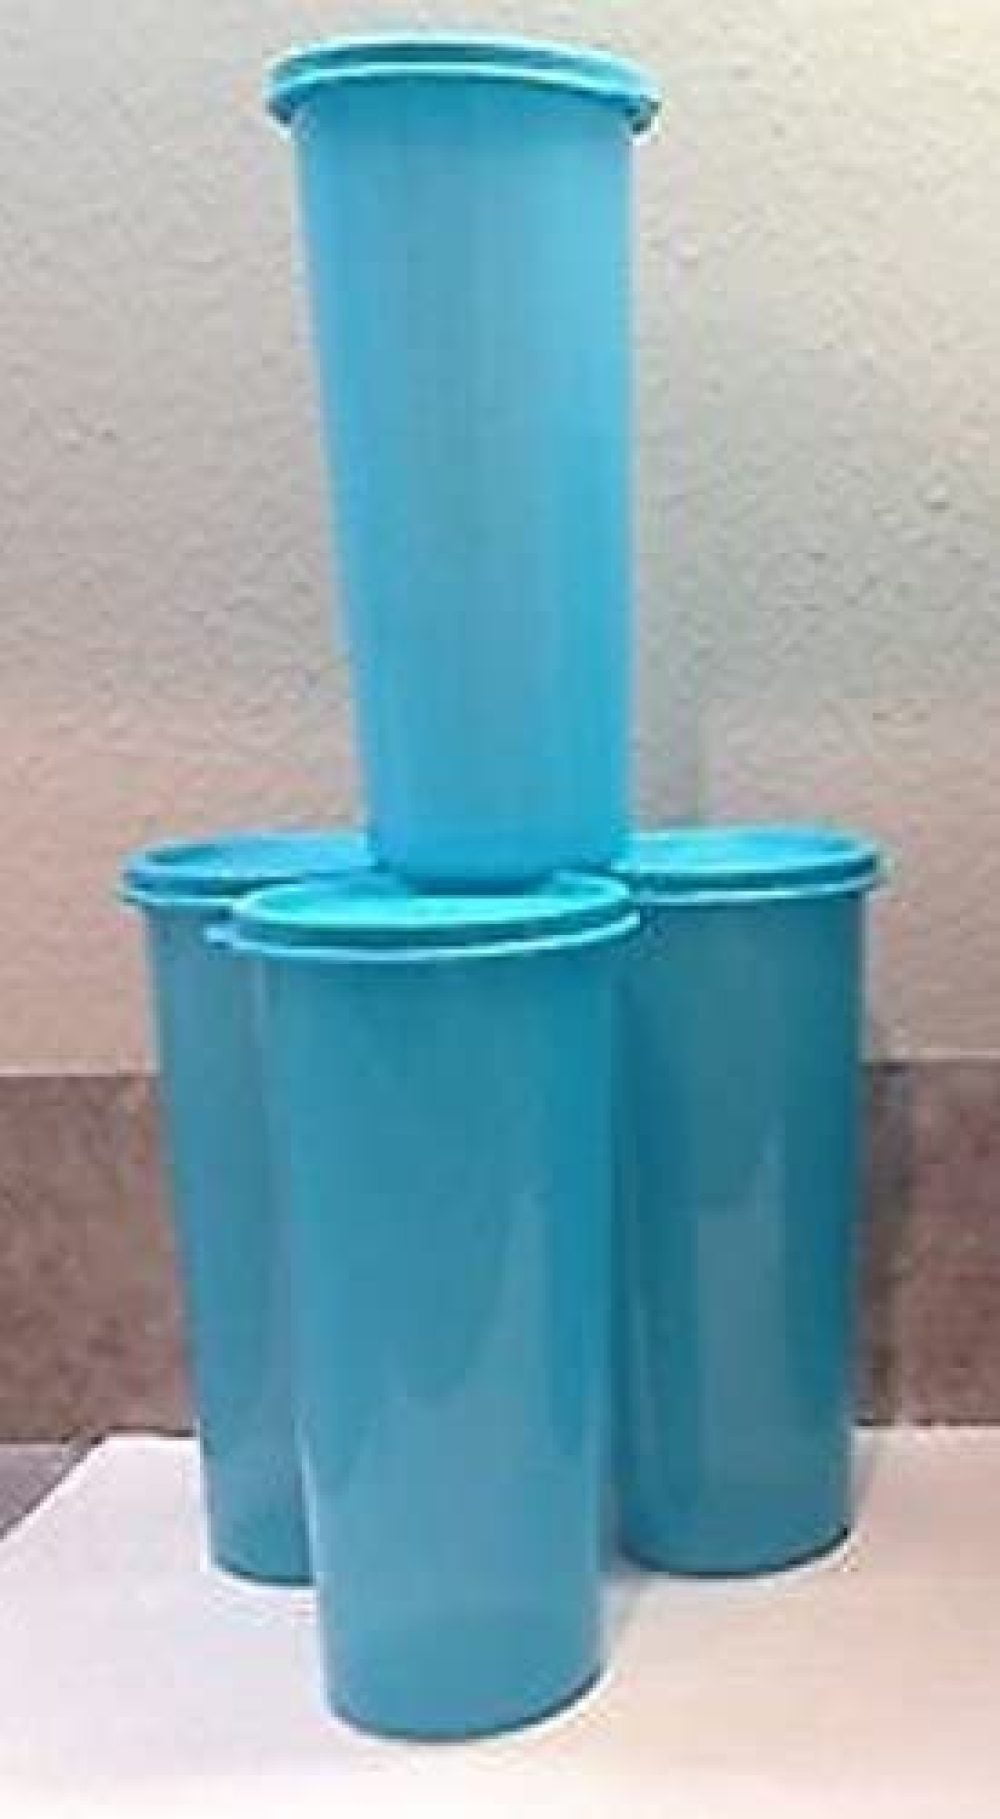 Tupperware Tropical Cups Set of 4 in 2 colors with sparkles-New Free Shipping 